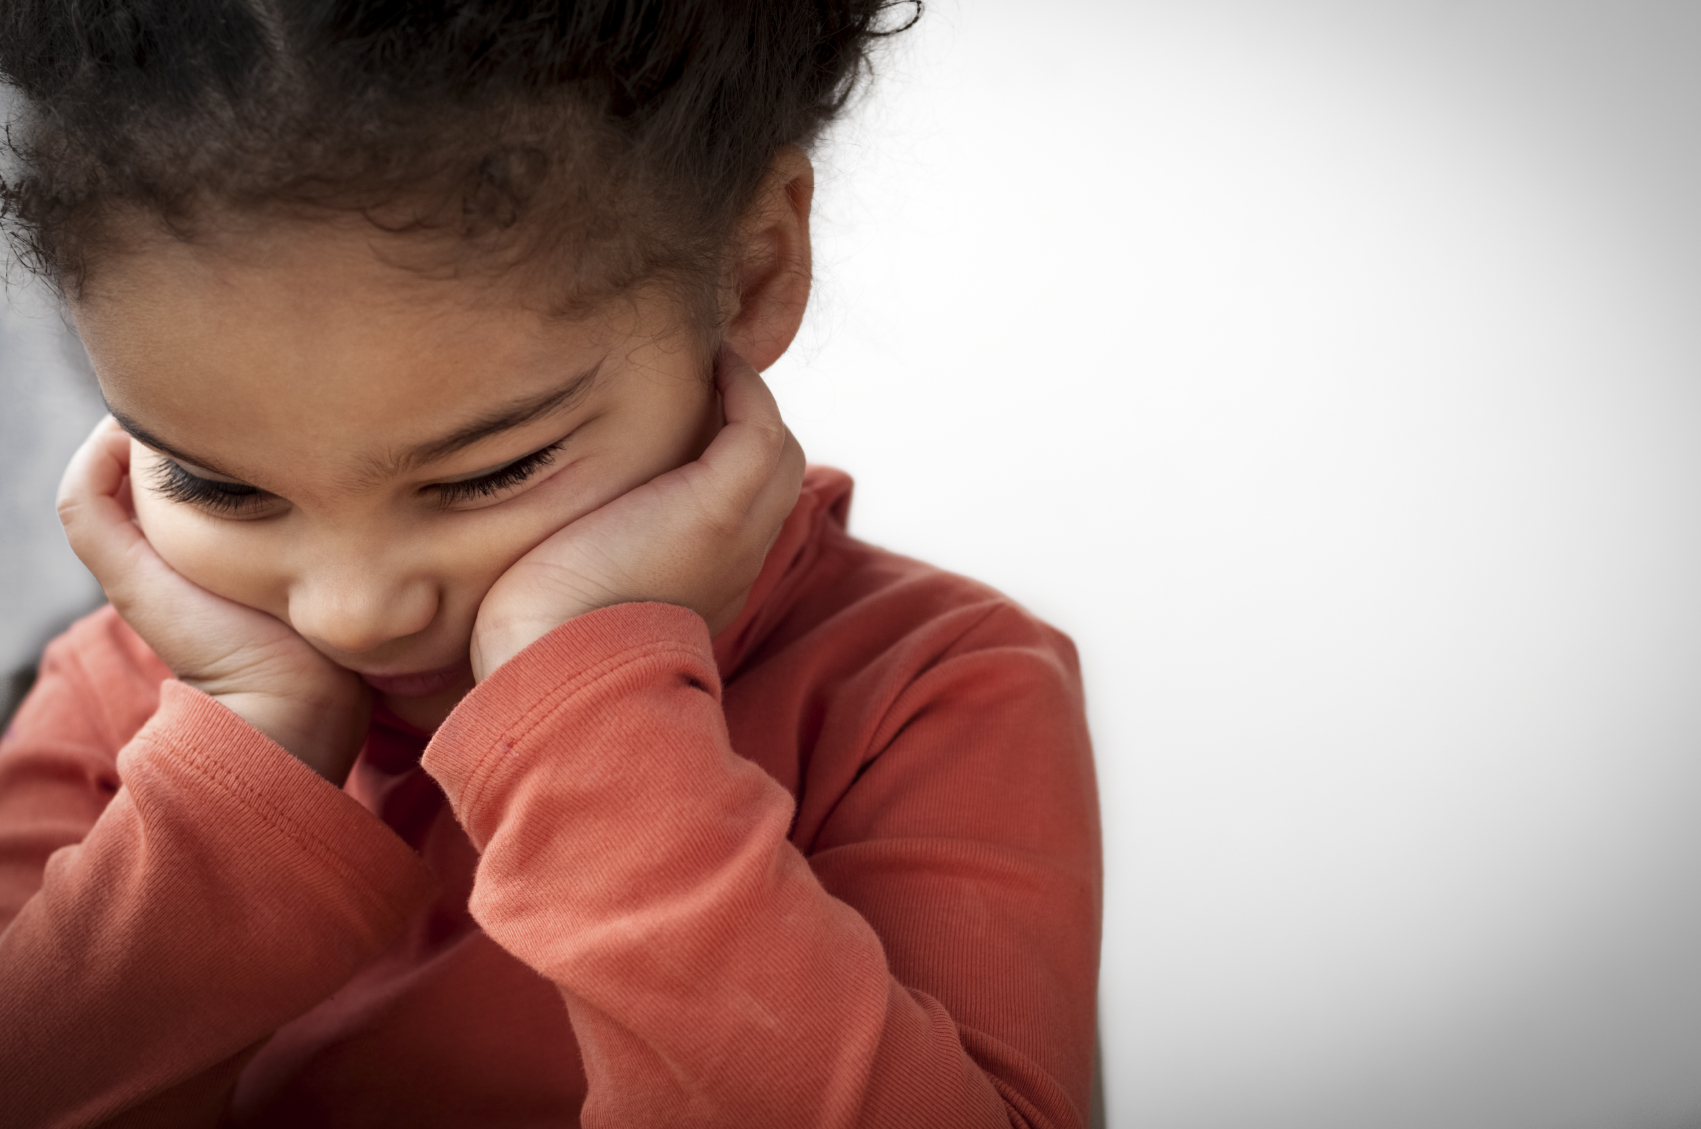 Is Your Child Anxious? Here's How to Address Their Worry